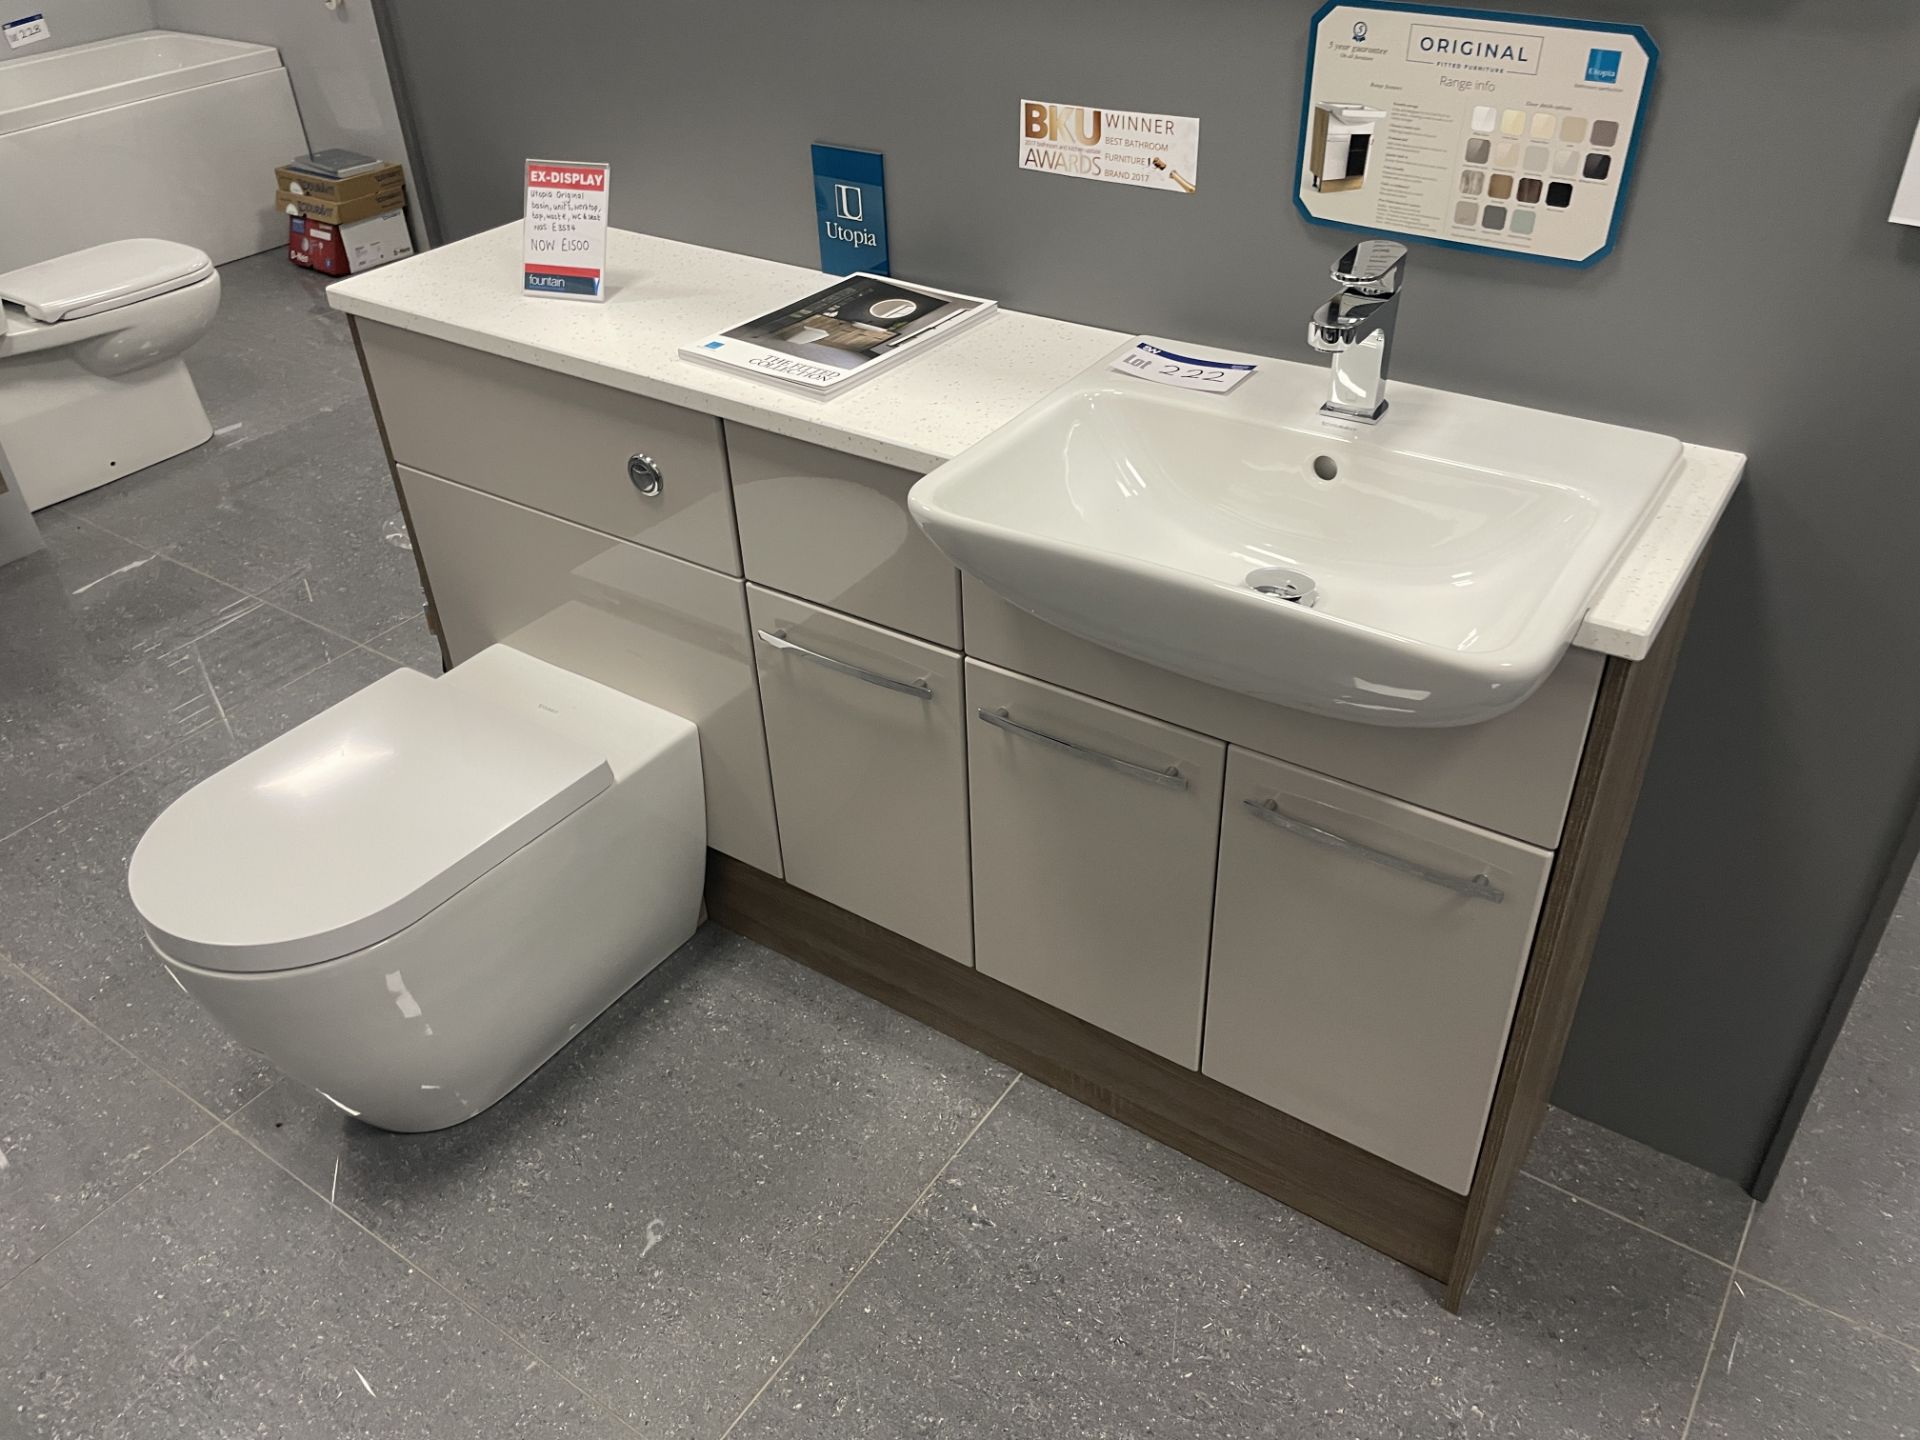 Duravit Basin & Toilet Unit, with tap, approx. 1.55m wide Please read the following important